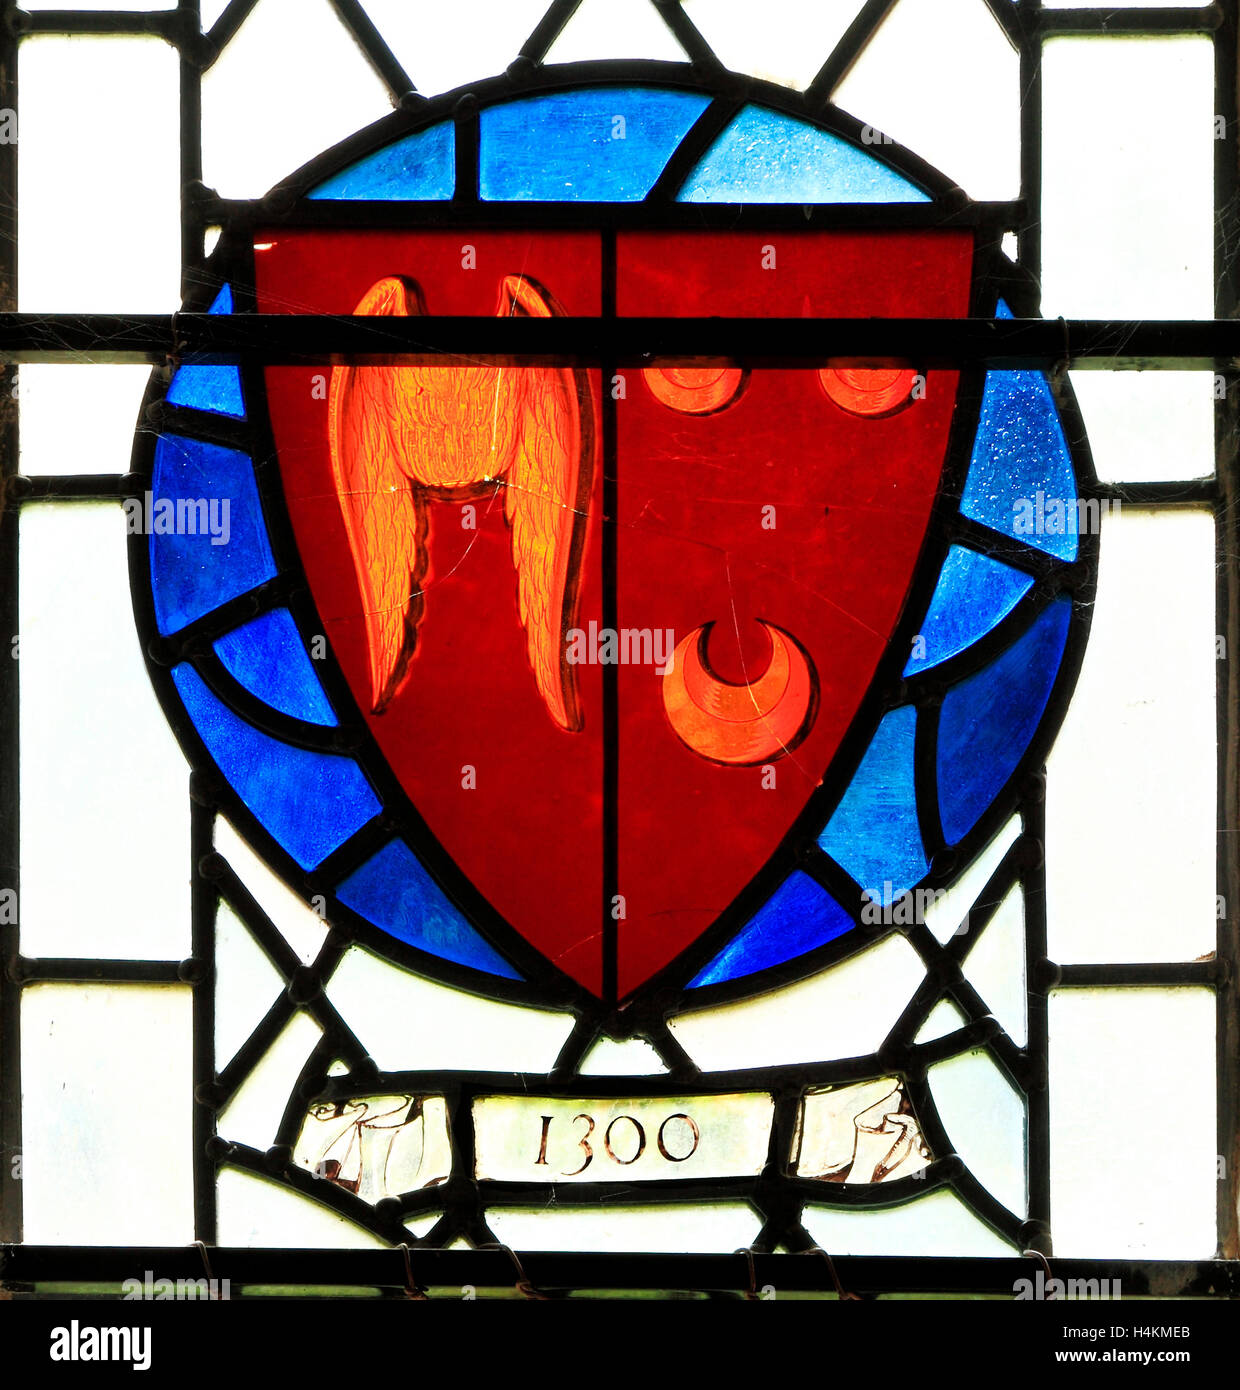 Stanhoe, Norfolk, Arms of Roger de St. Mauro, 1300, Seymour family, stained glass roundel window  heraldry, heraldic shield Stock Photo